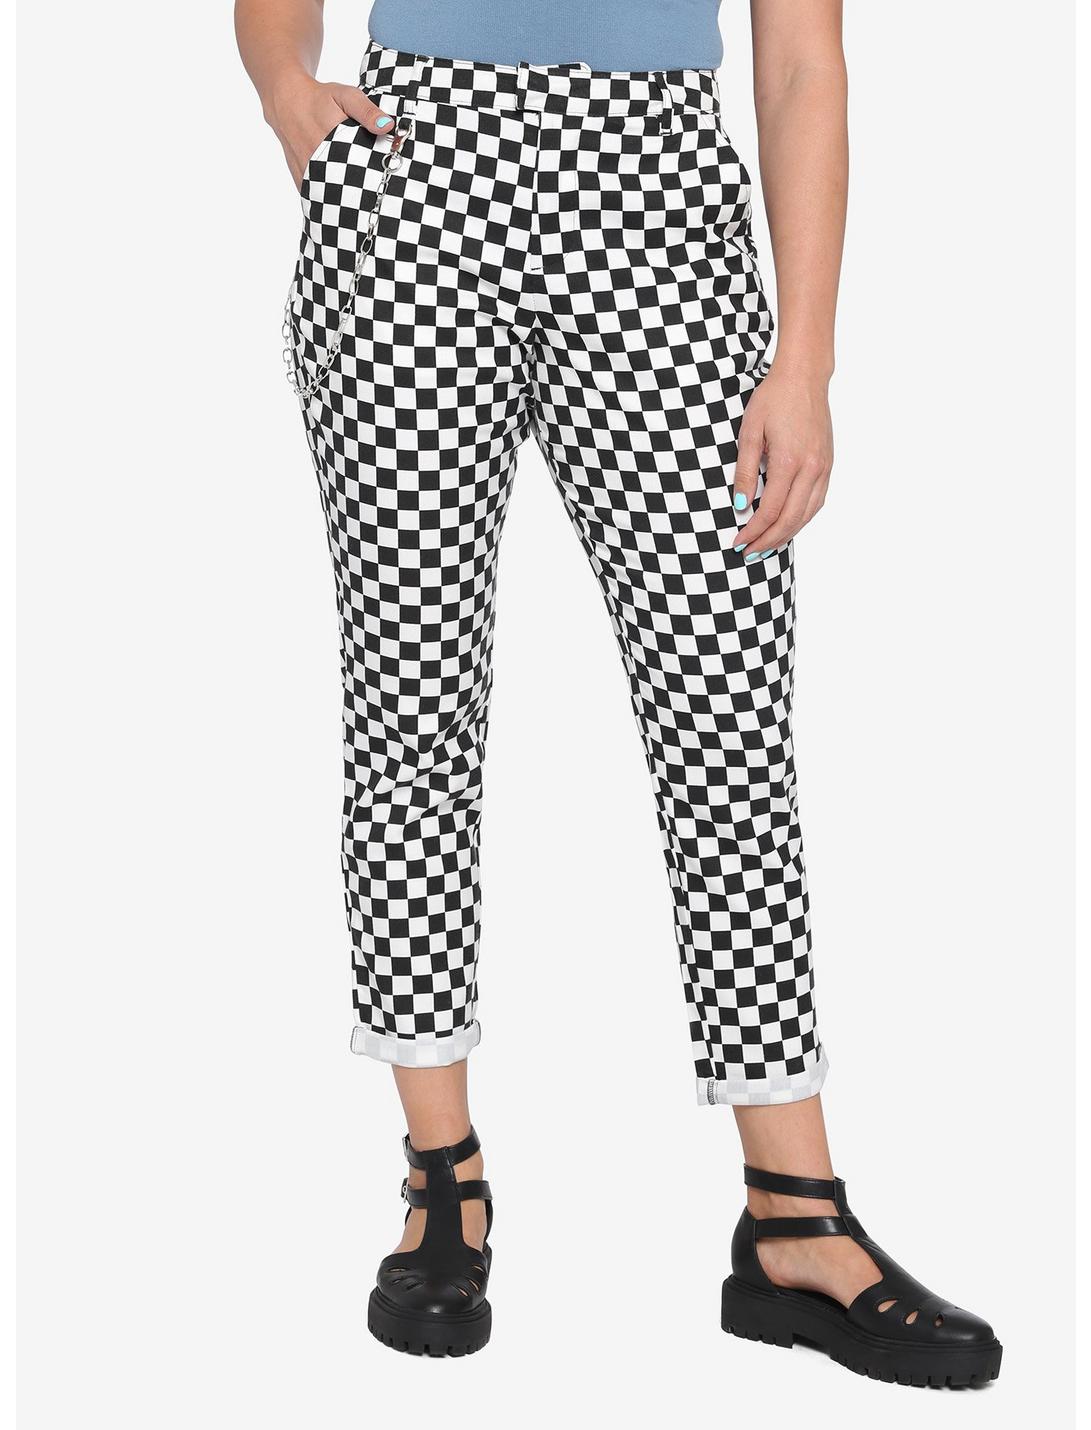 Black & White Checkered Pants With Detachable Chain, MULTI, hi-res